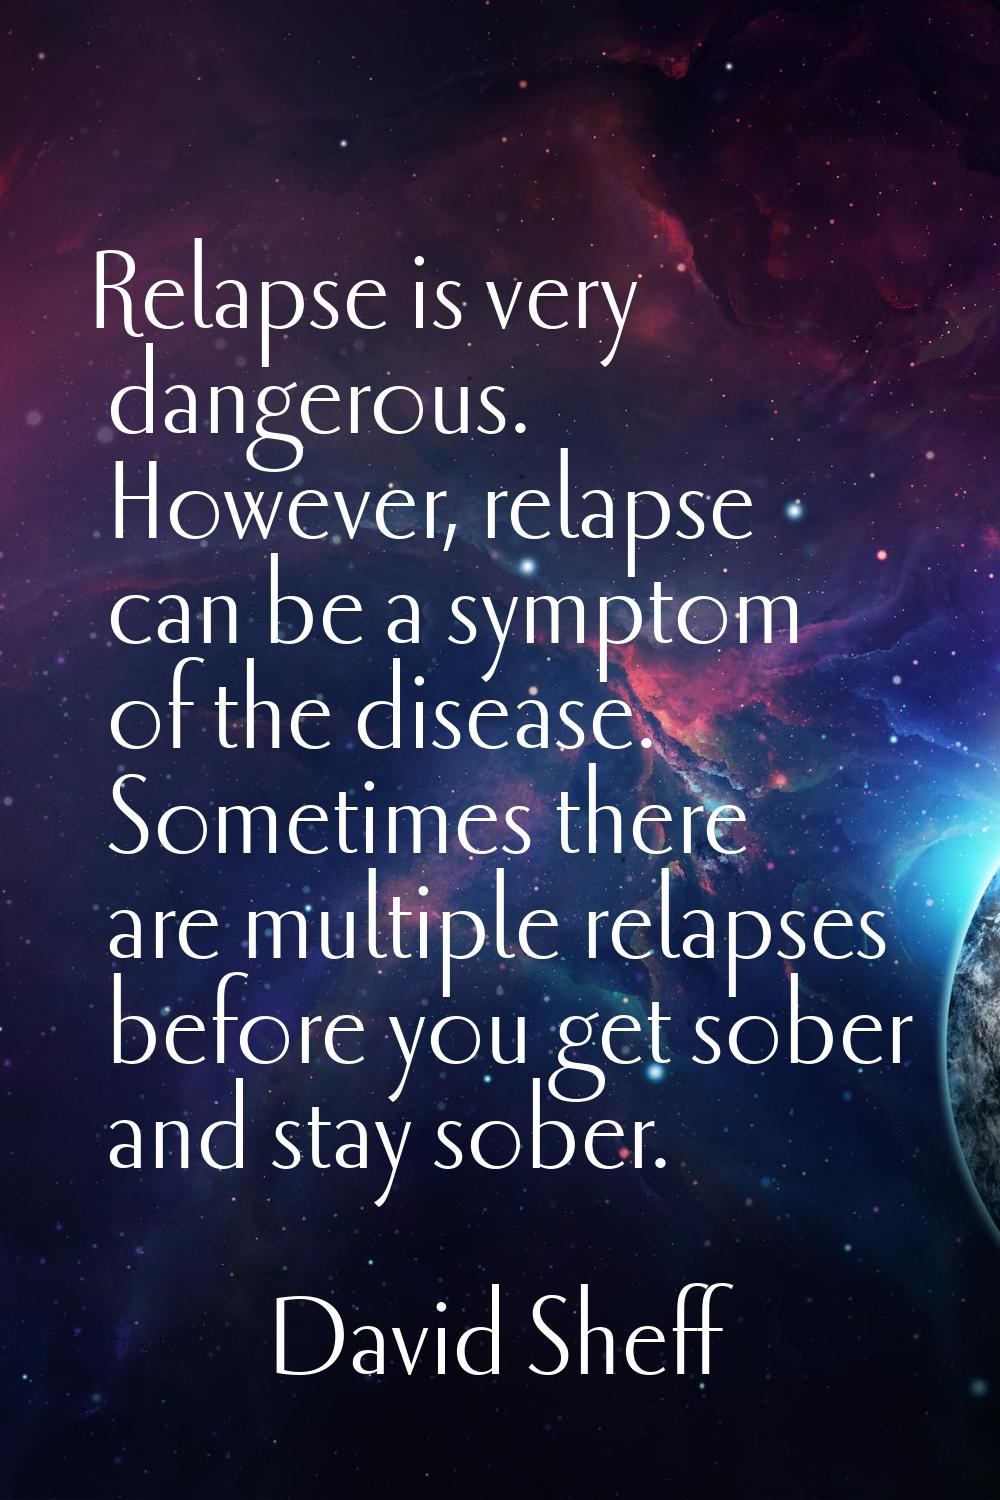 Relapse is very dangerous. However, relapse can be a symptom of the disease. Sometimes there are mu